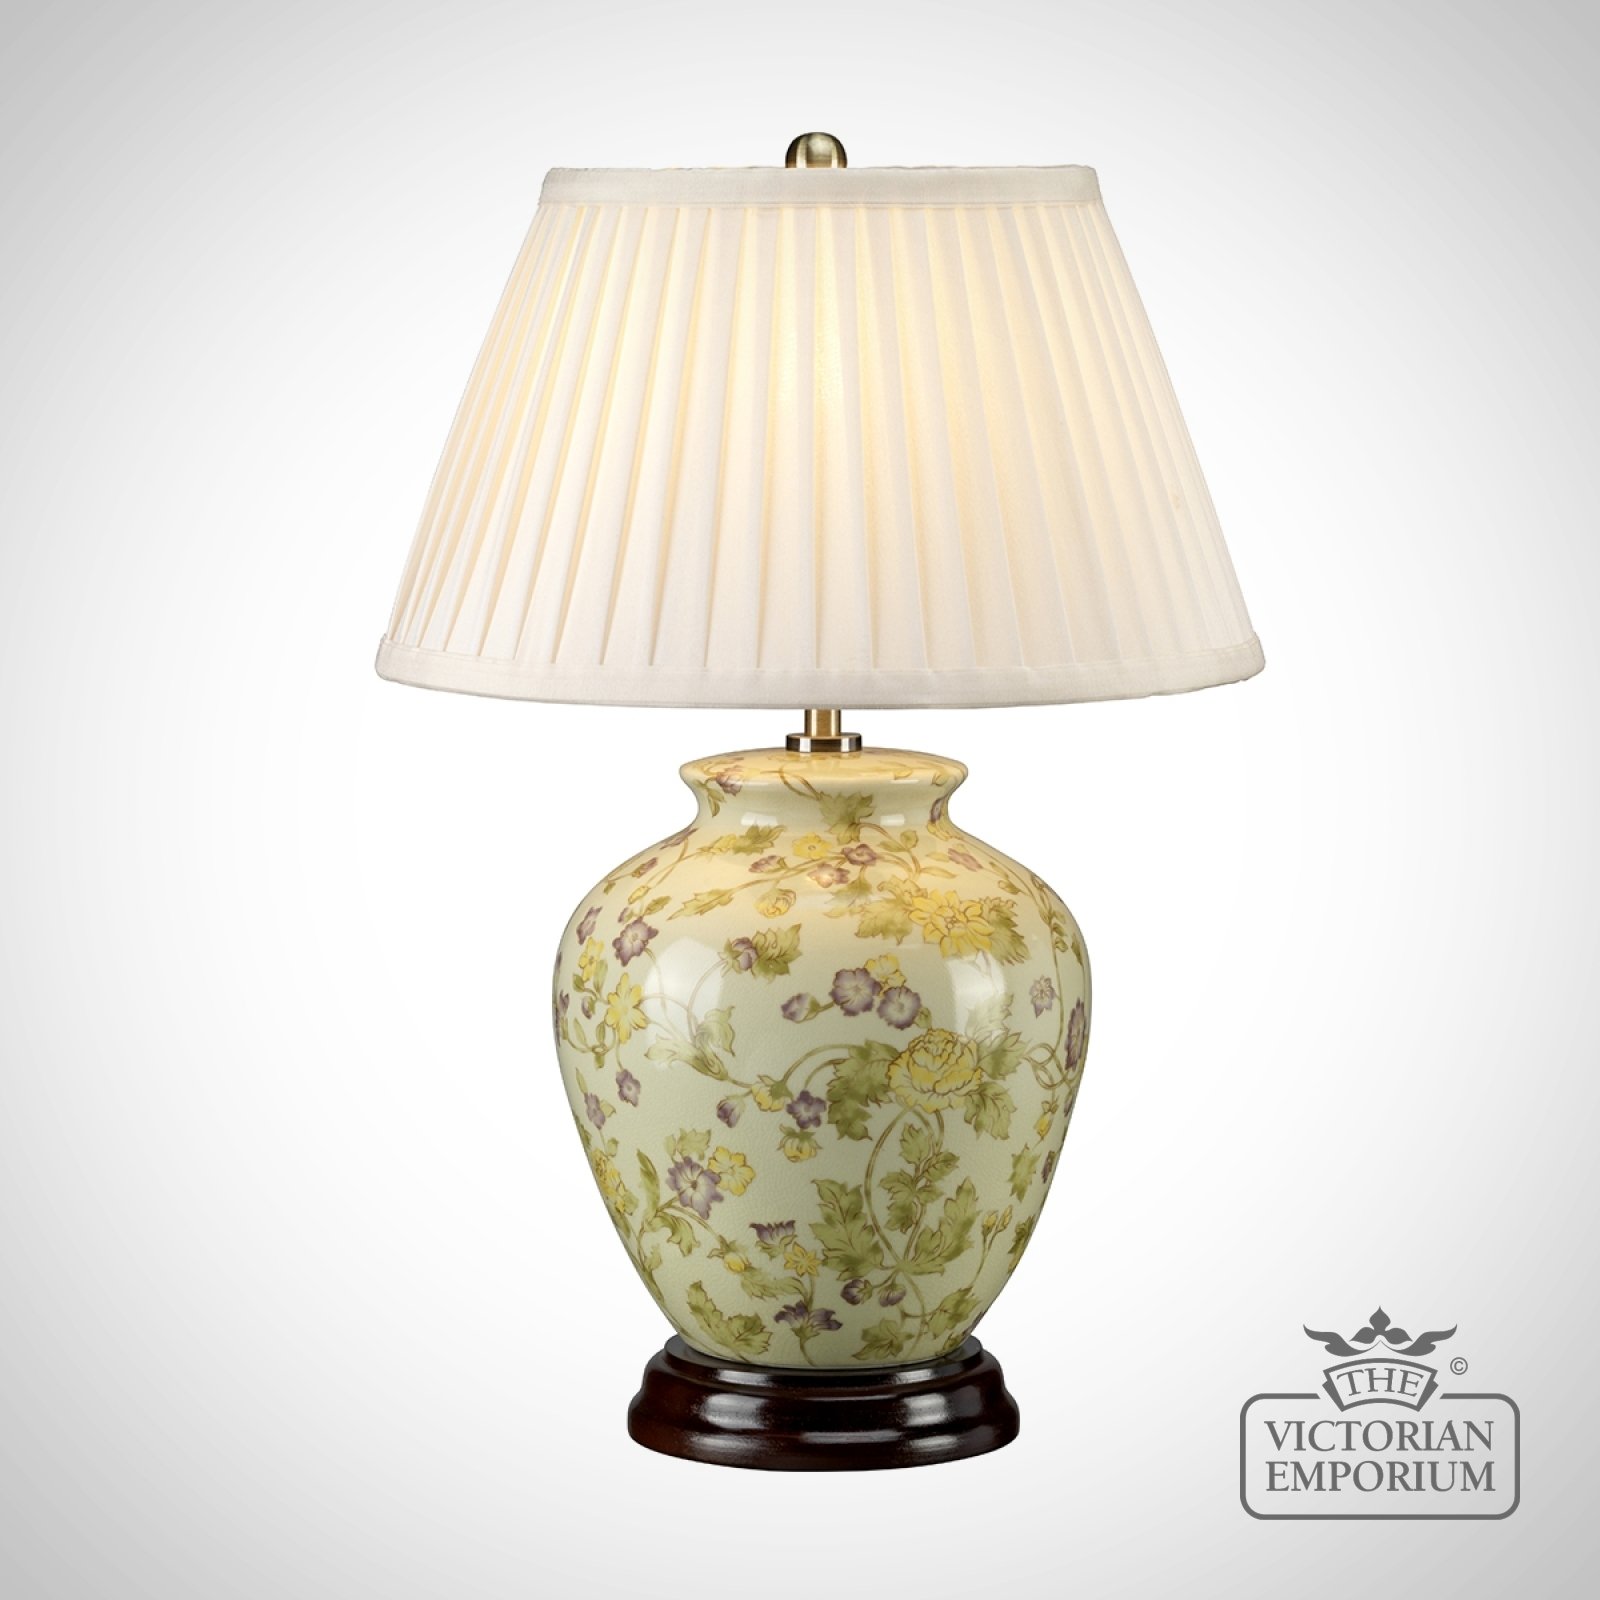 Yelllow Flowers Table Lamp with Porcelain Base and Fabric Shade